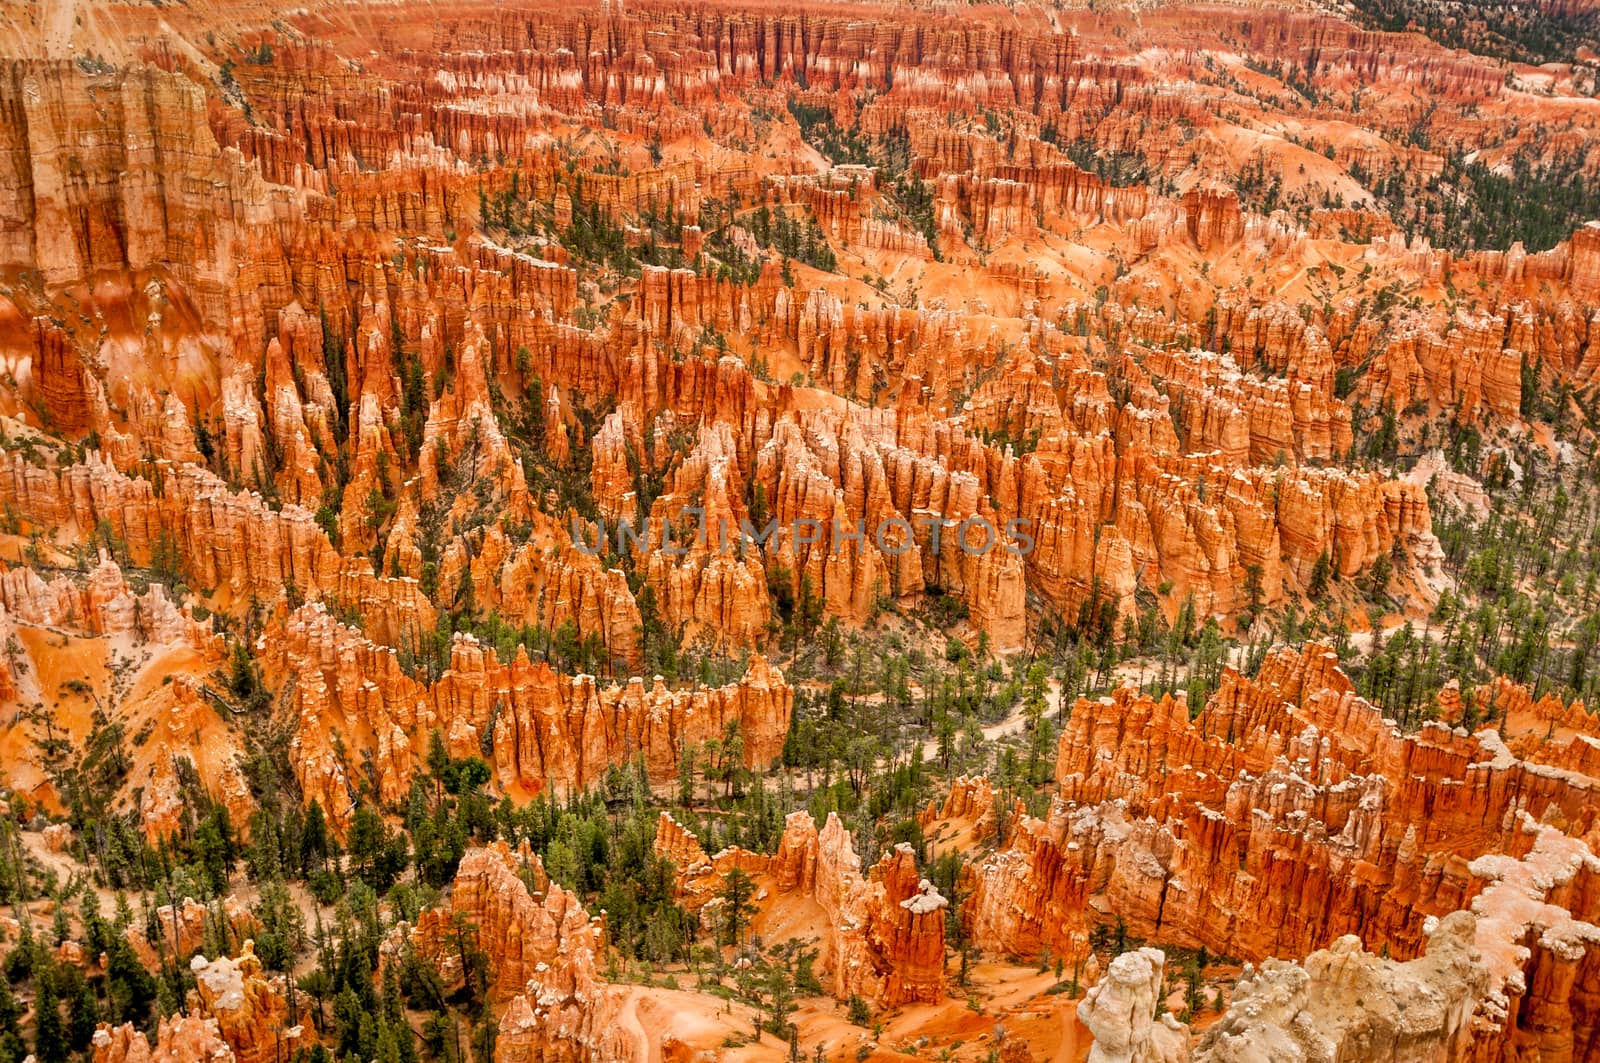 Bryce Canyon amphitheater west USA utah 2013 valley